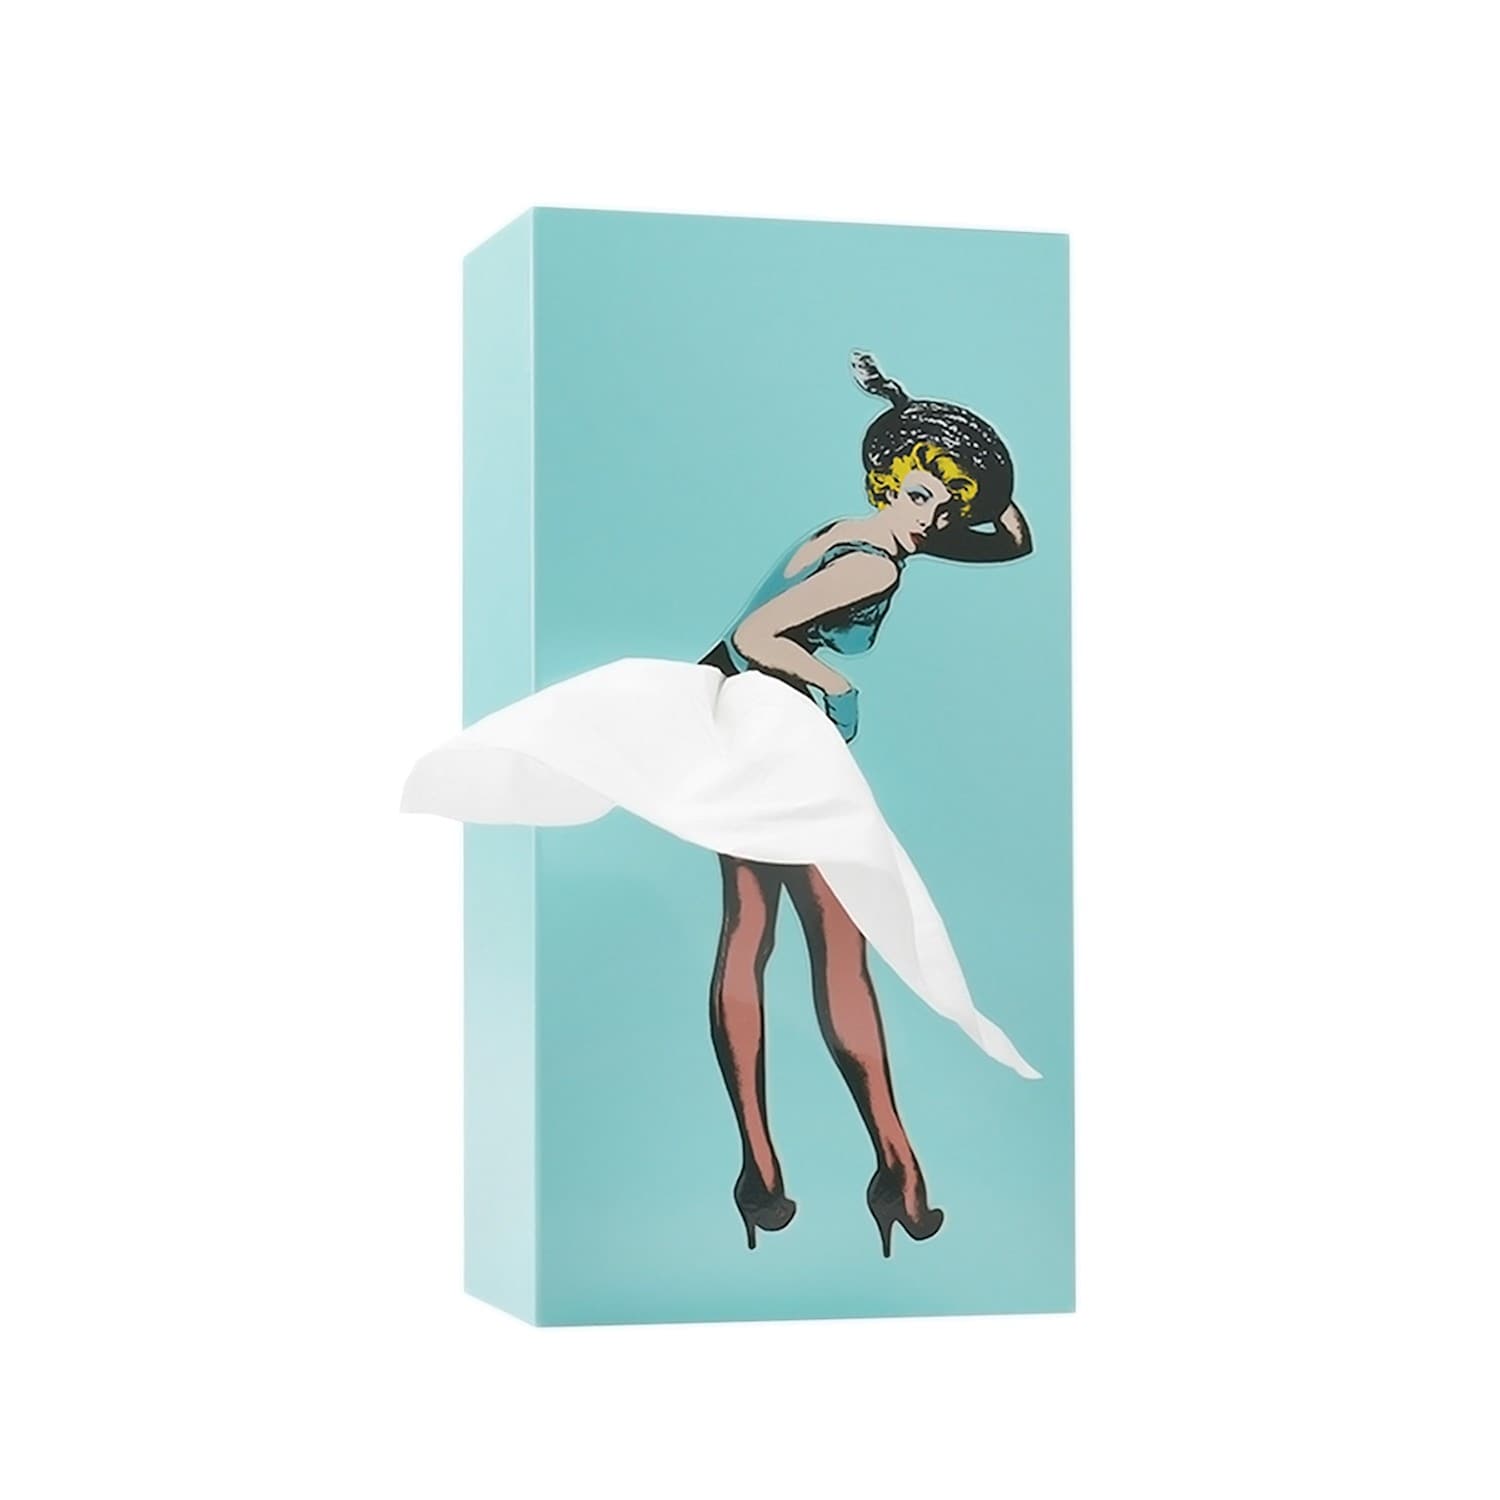 What On Earth Pin Up Girl Tissue Box Cover - Vintage Lady with Flying Skirt  Napkin Holder/Dispenser - Bed Bath & Beyond - 26972436